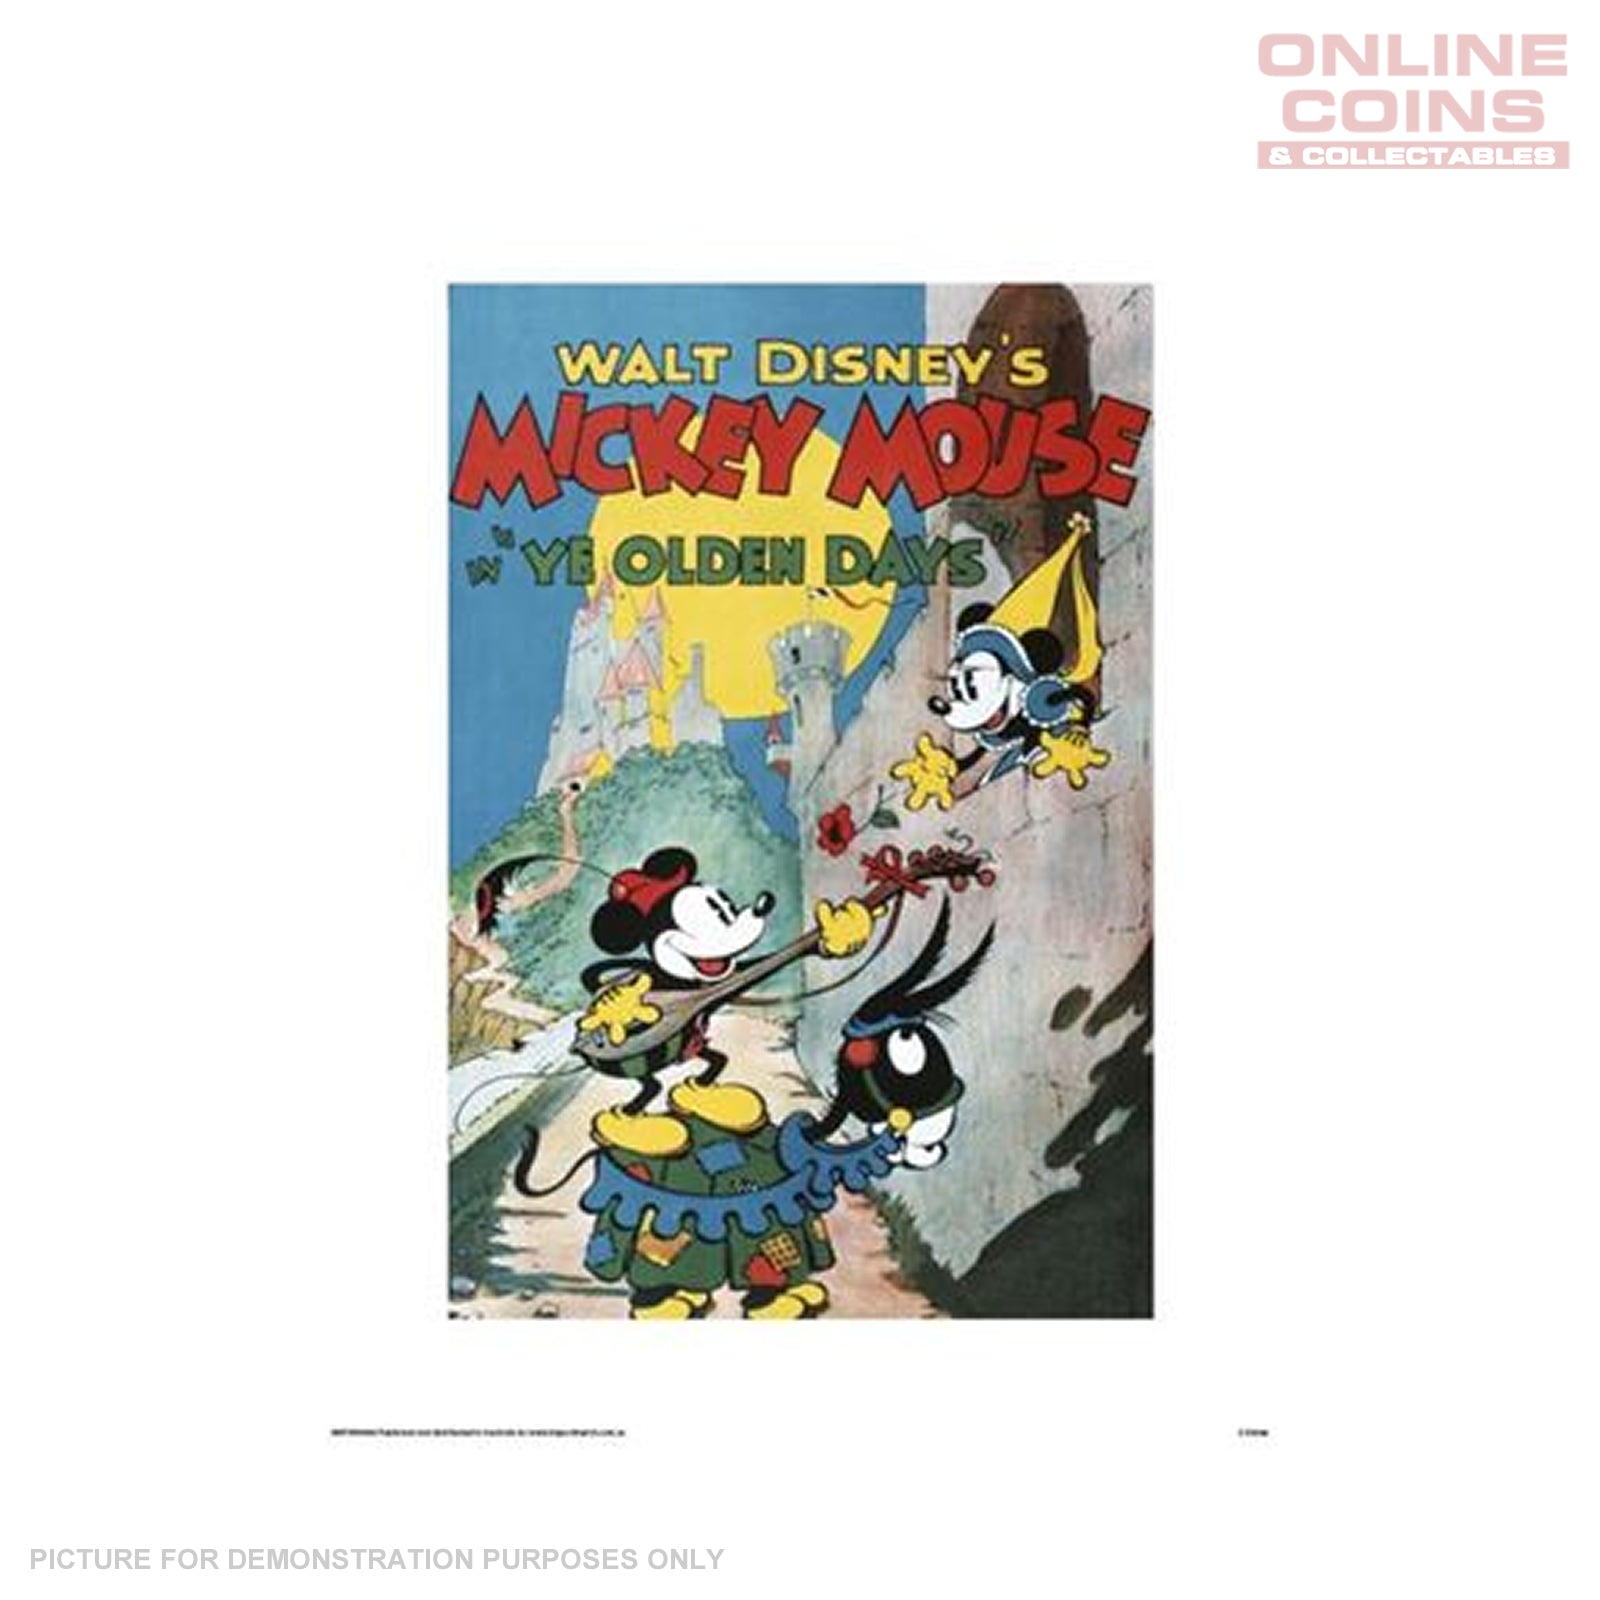 Disney Officially Licensed Art Print - Mickey Mouse Ye Olden Days